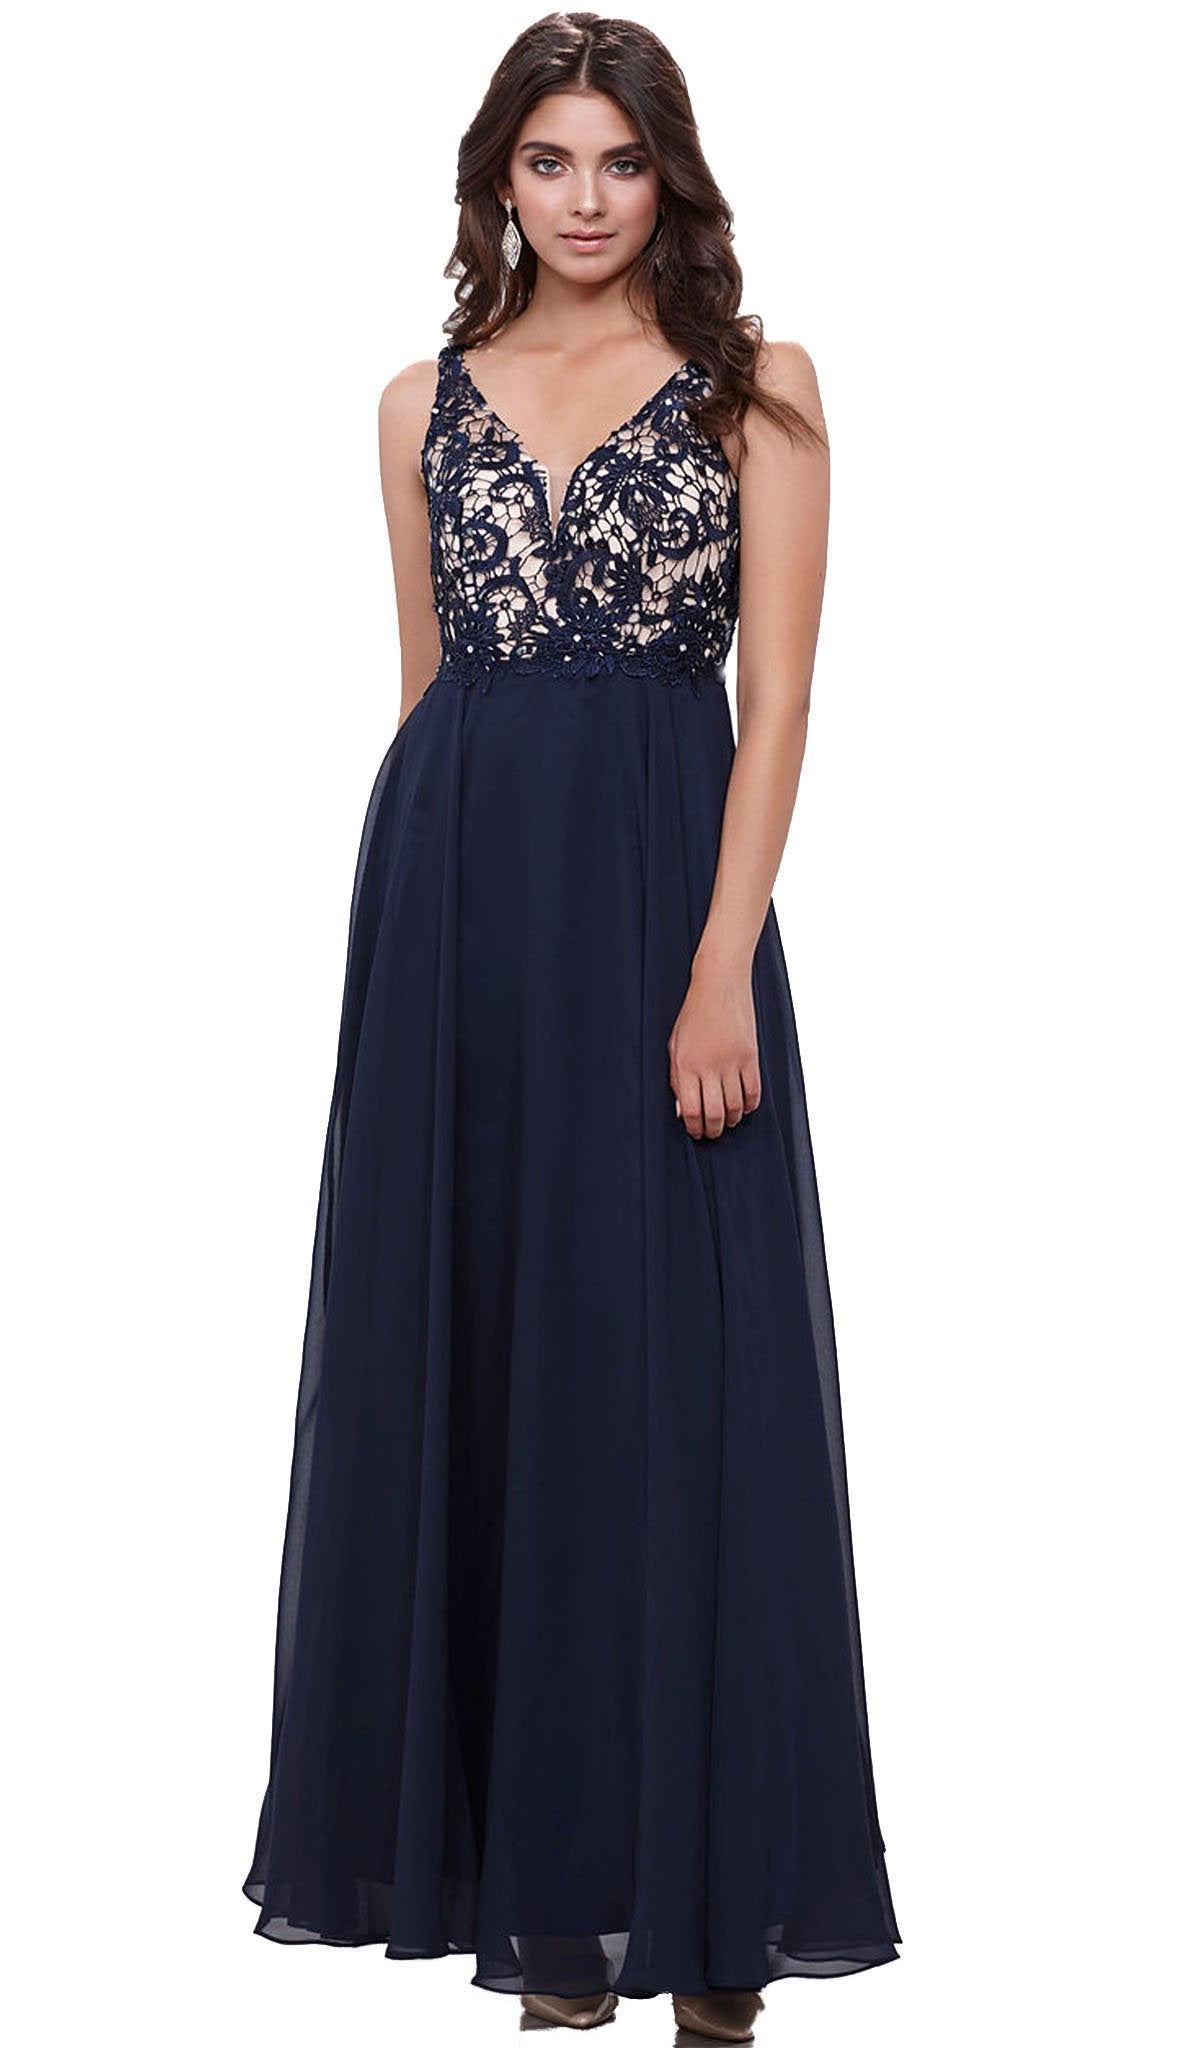 Nox Anabel - 8297 Sleeveless Lace Bodice A-Line Evening Dress Special Occasion Dress XS / Navy